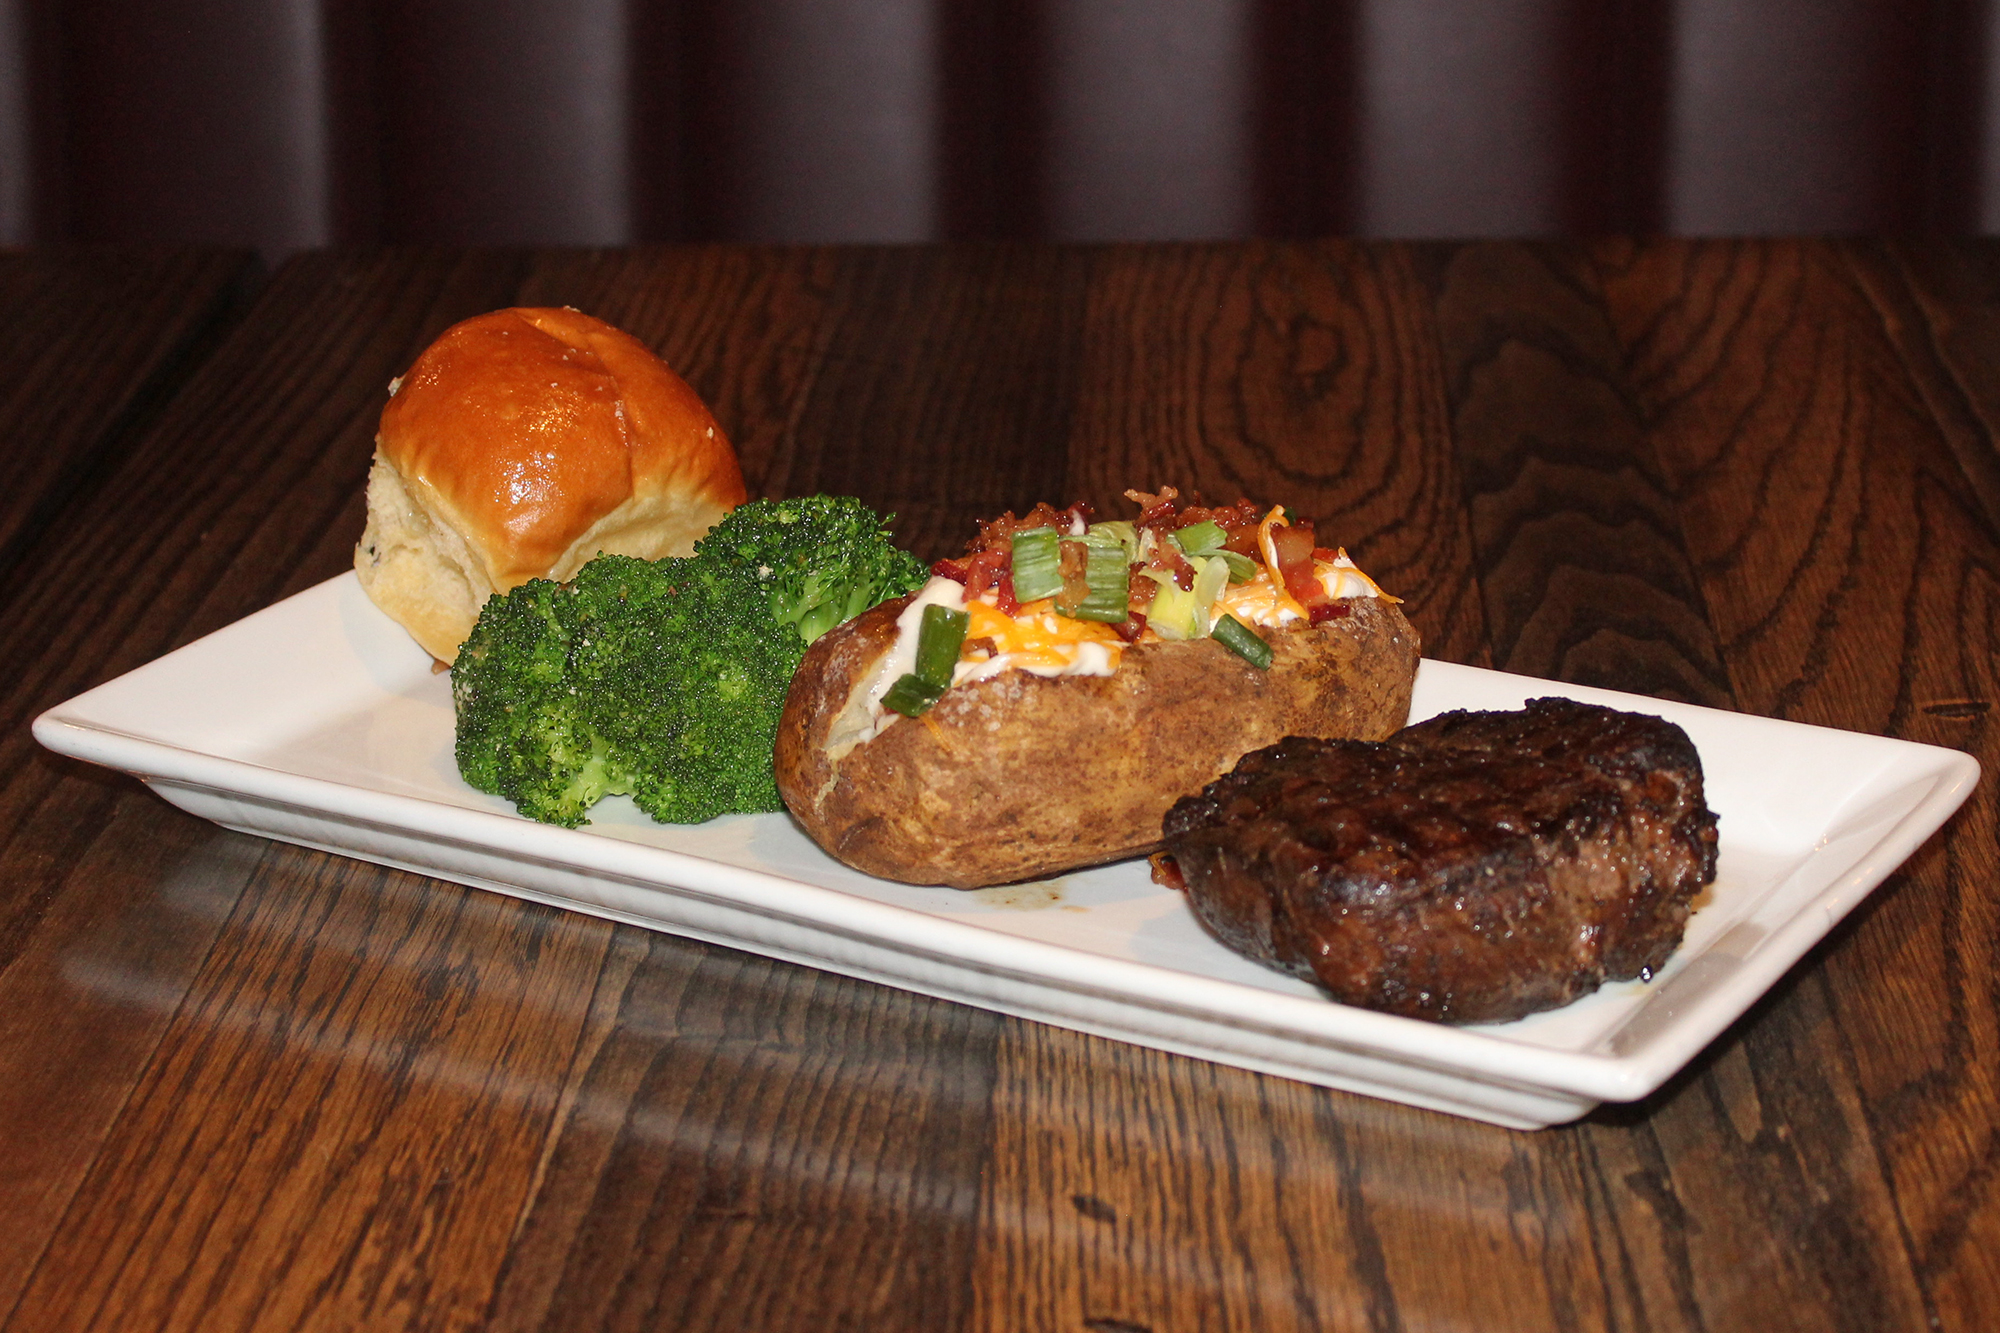 Filet with baked potato, broccoli and roll